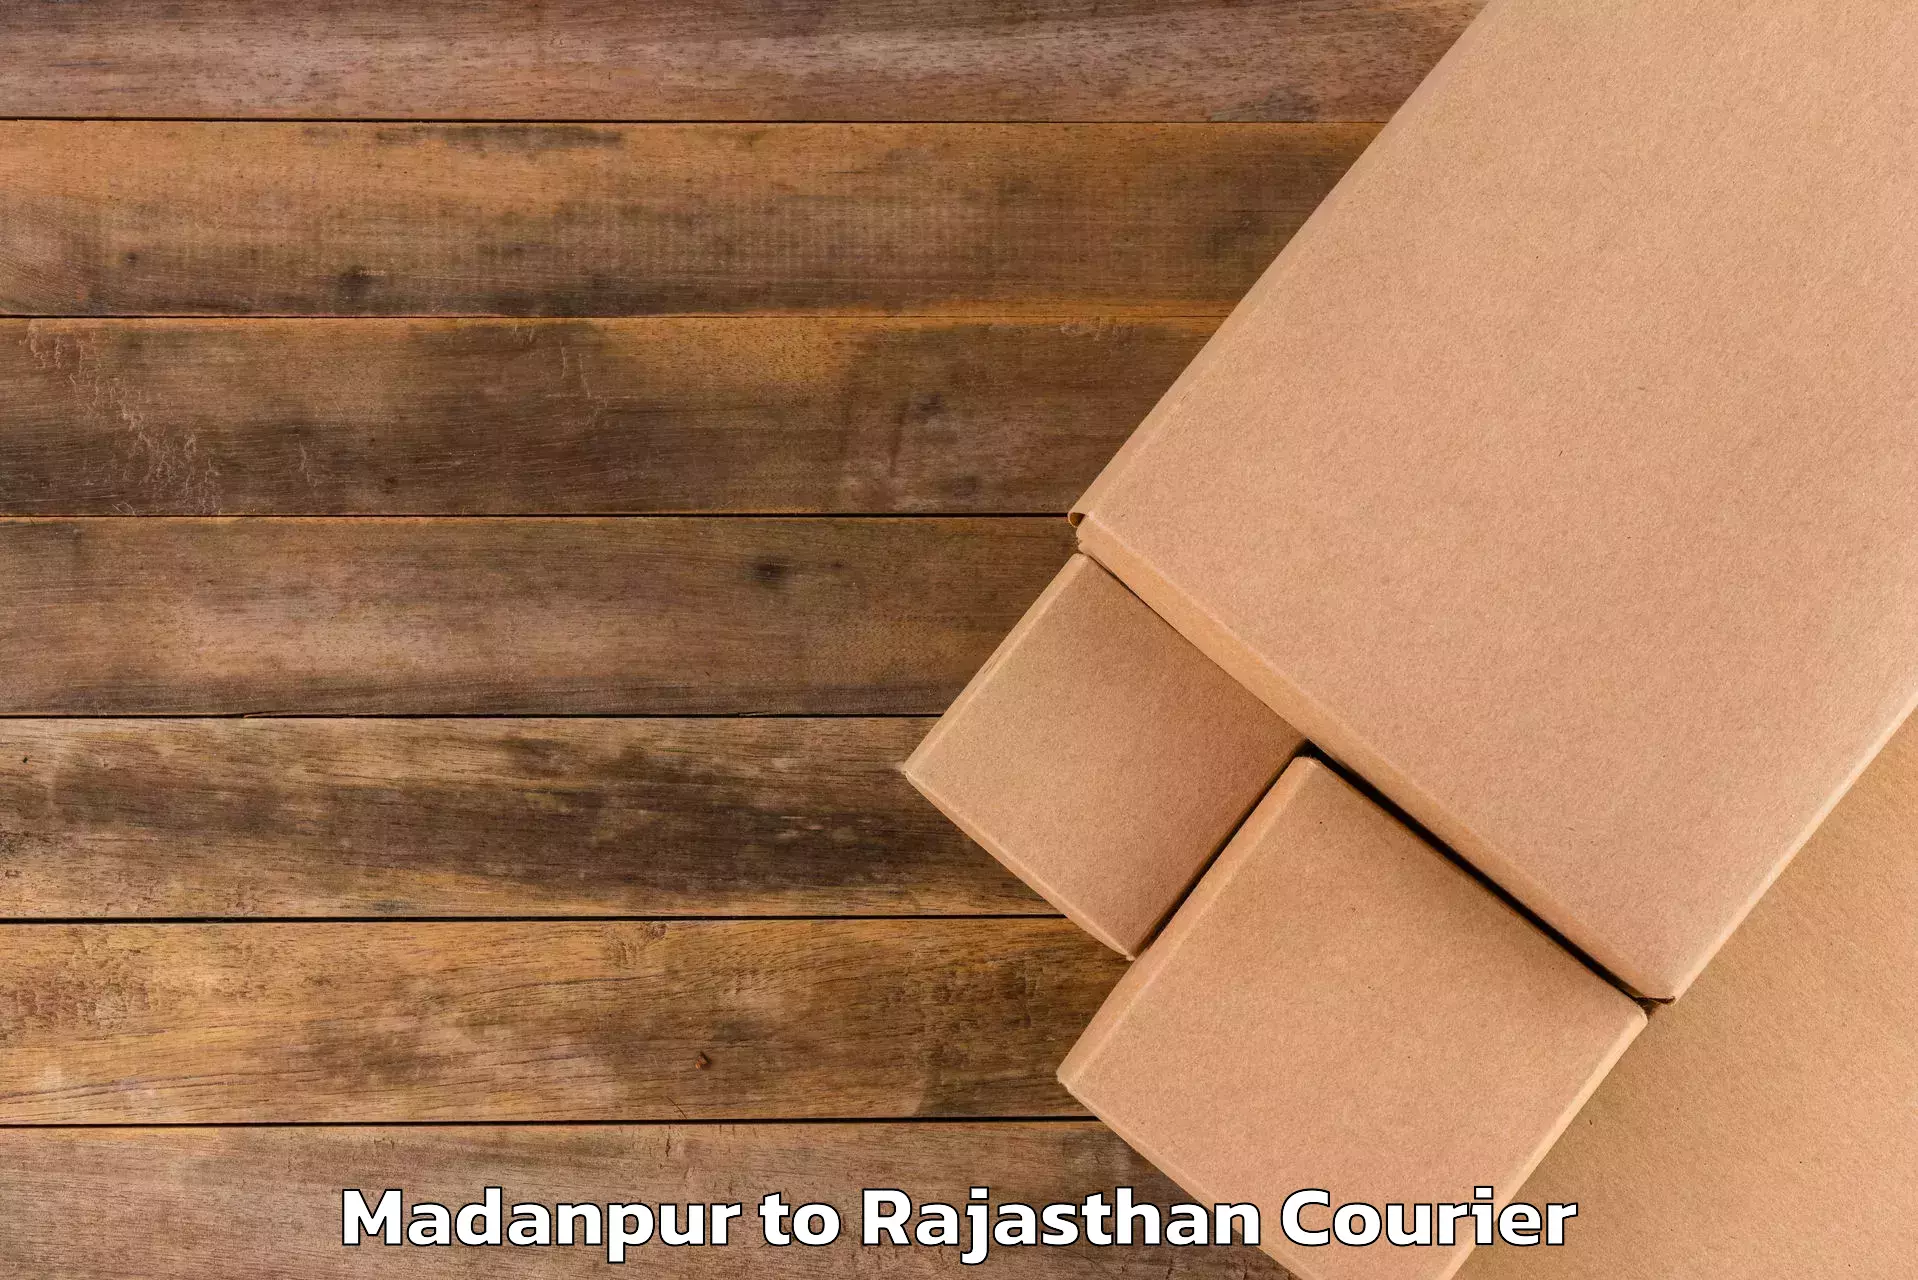 Luggage delivery network Madanpur to Khandela Sikar